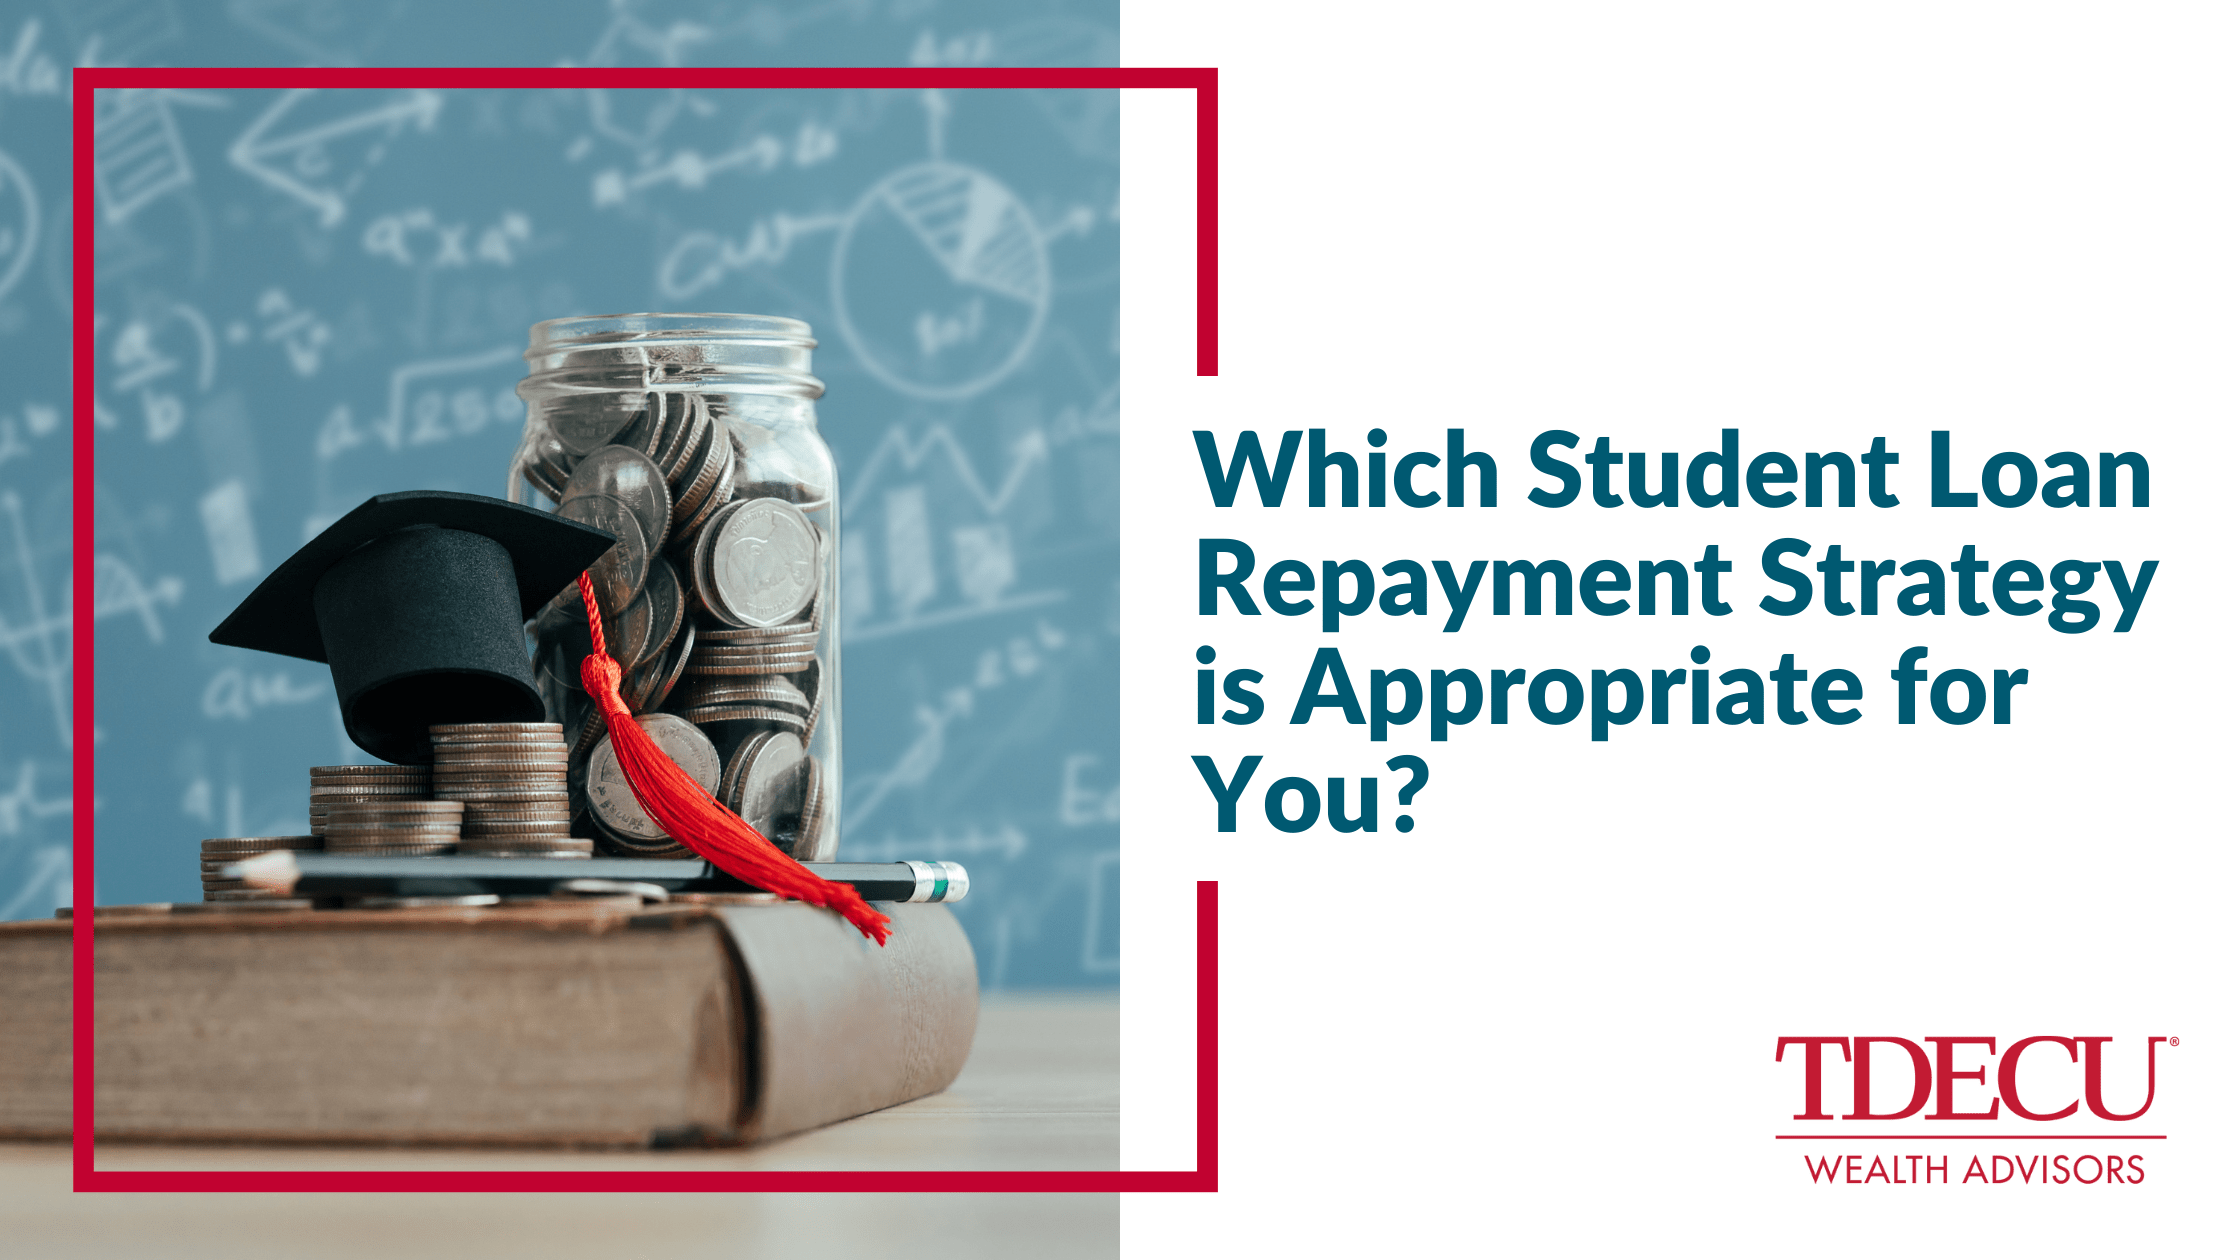 Which Student Loan Repayment Strategy Is Appropriate for You?